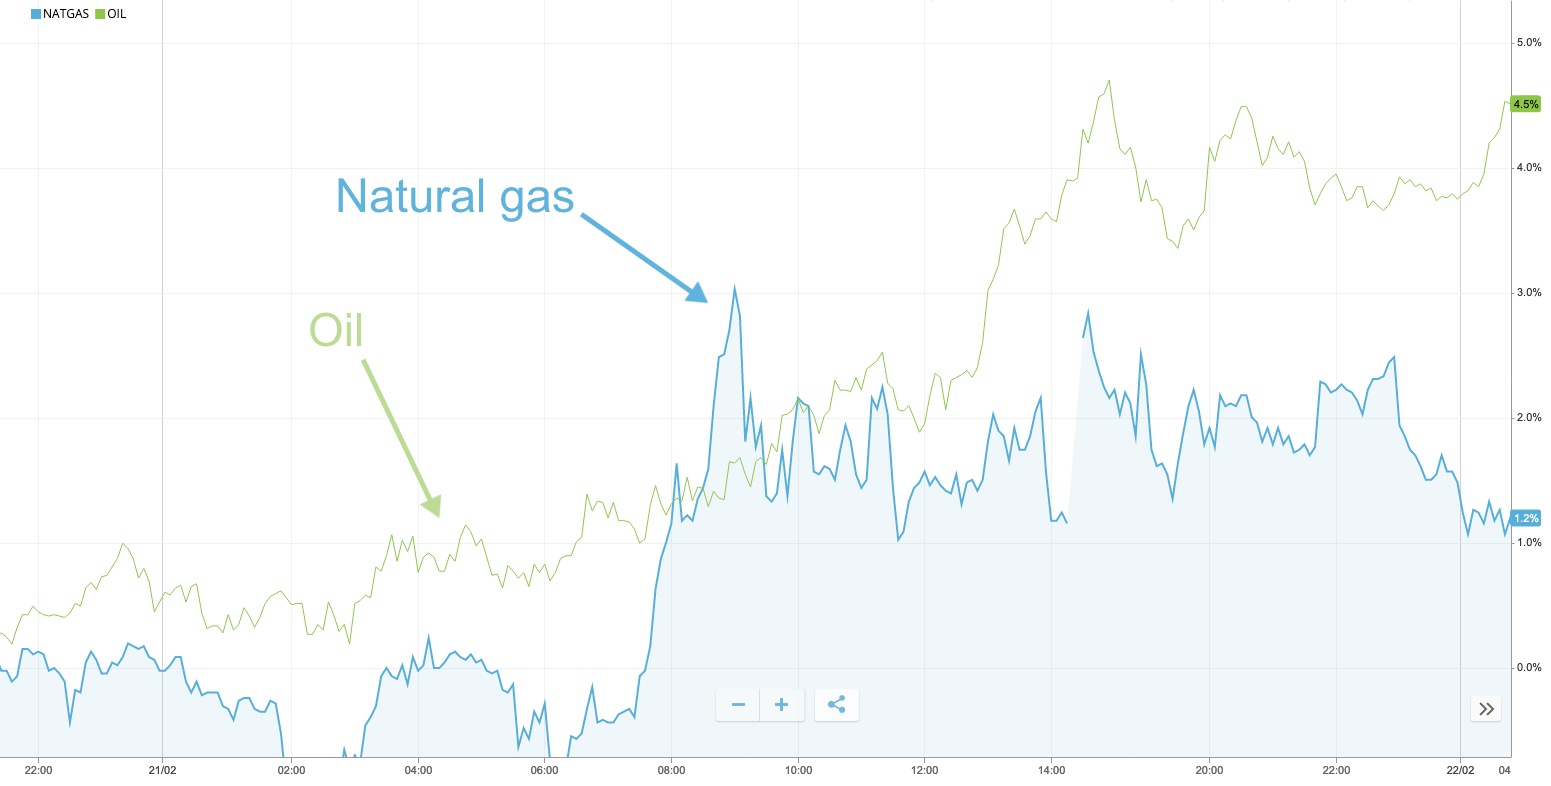 binary options chart with natural gas and oil comparison